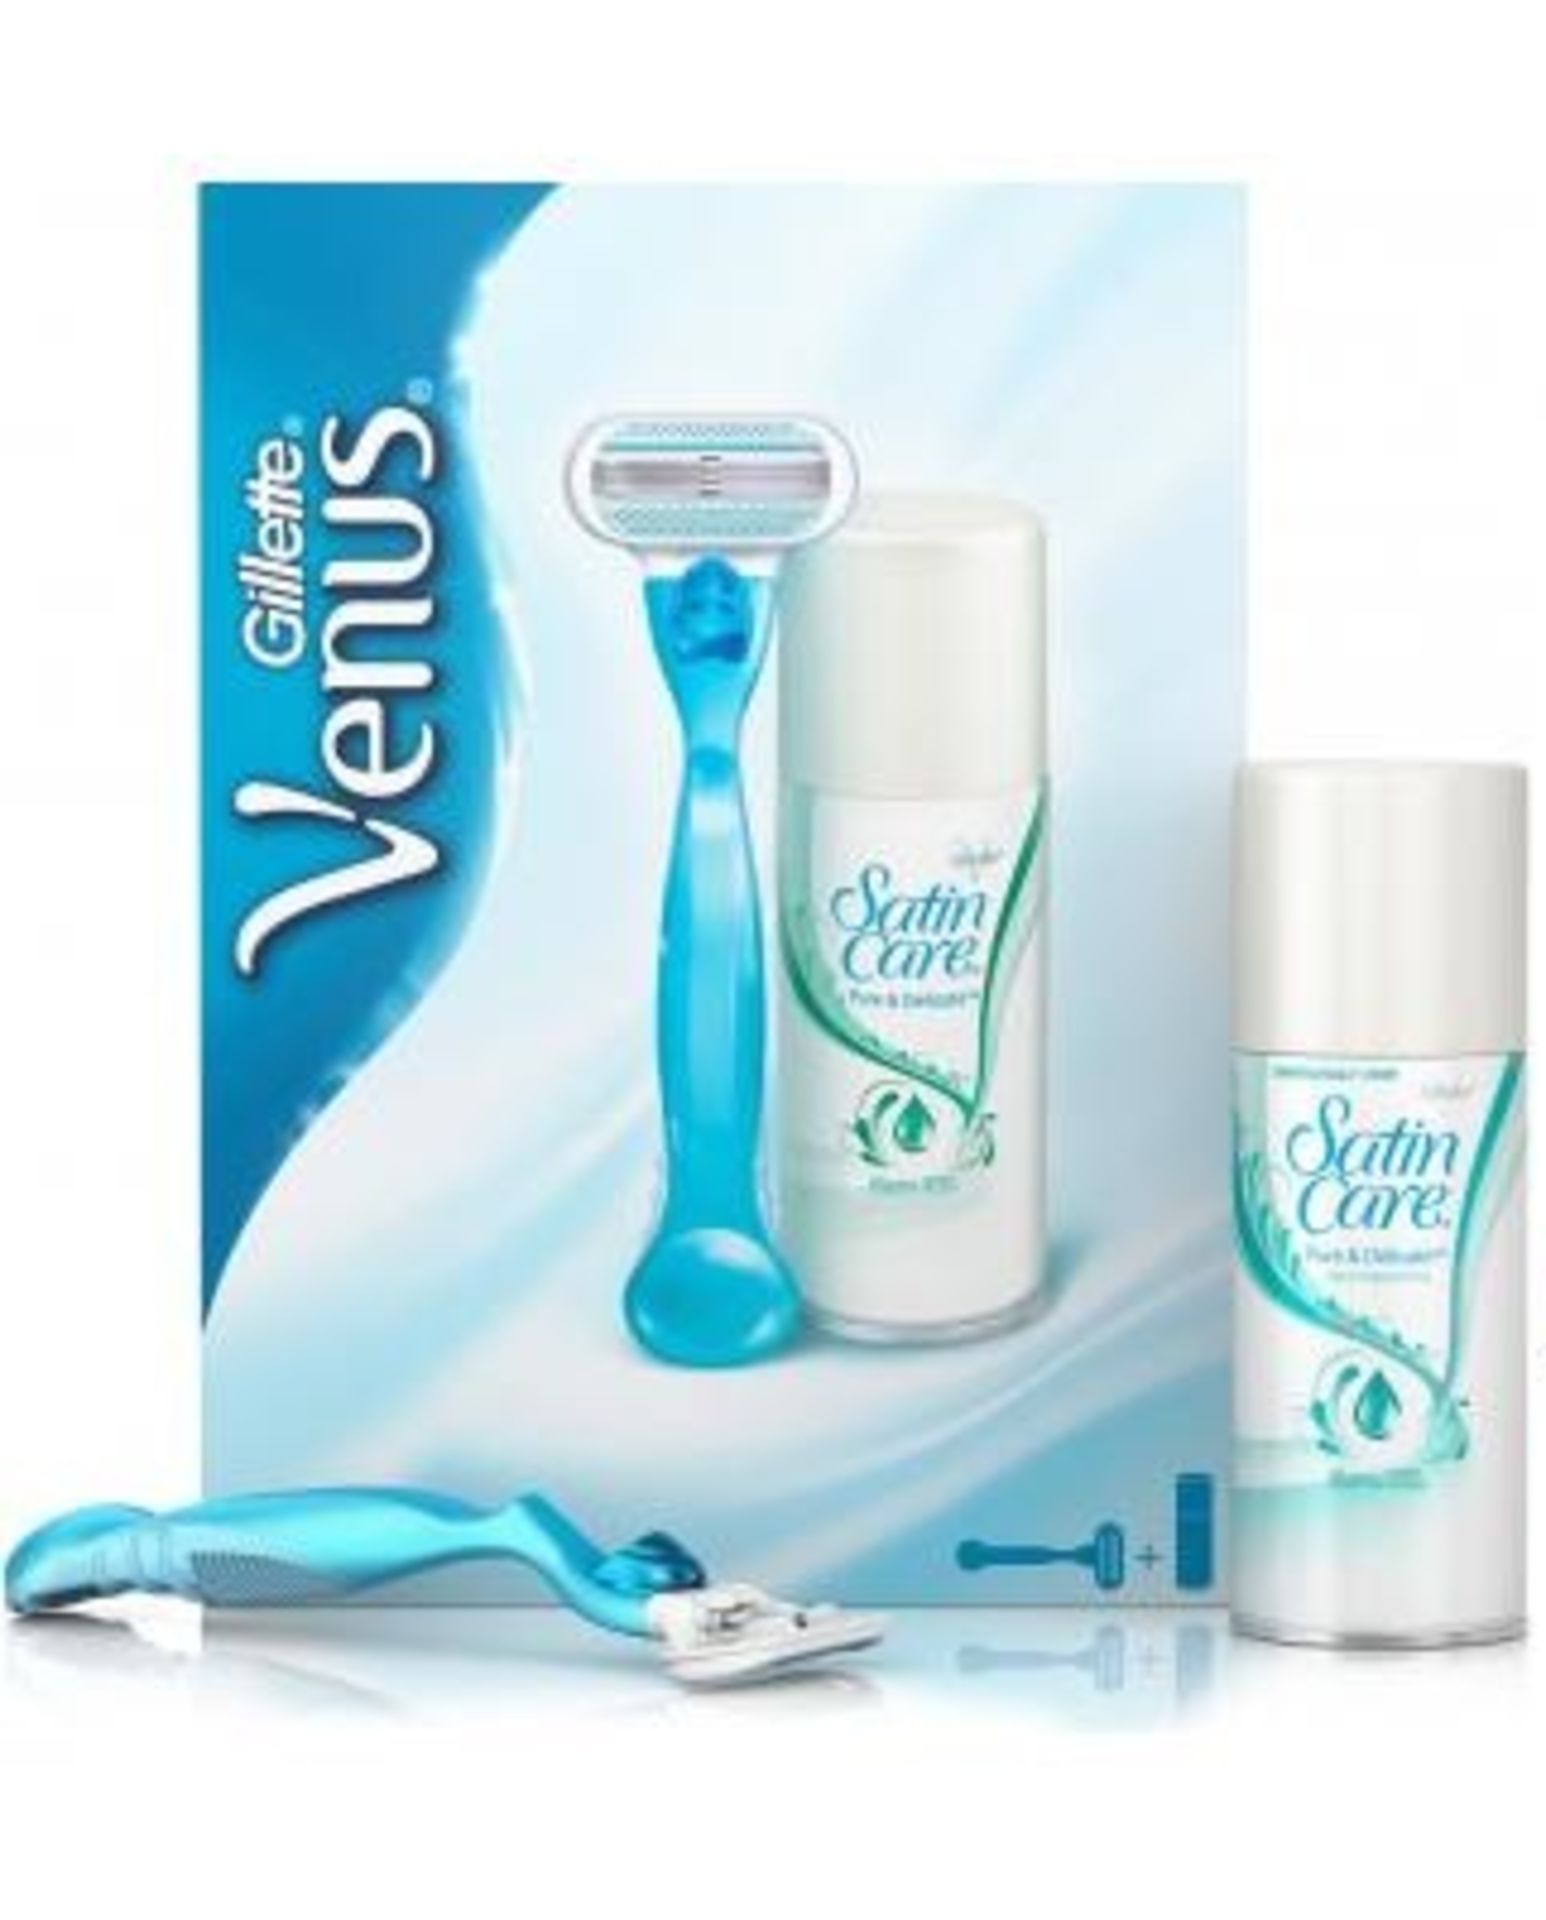 V *TRADE QTY* Brand New Gillette Venus Satin Care Pure & Delicate Set With Razor And Shave Gel X 4